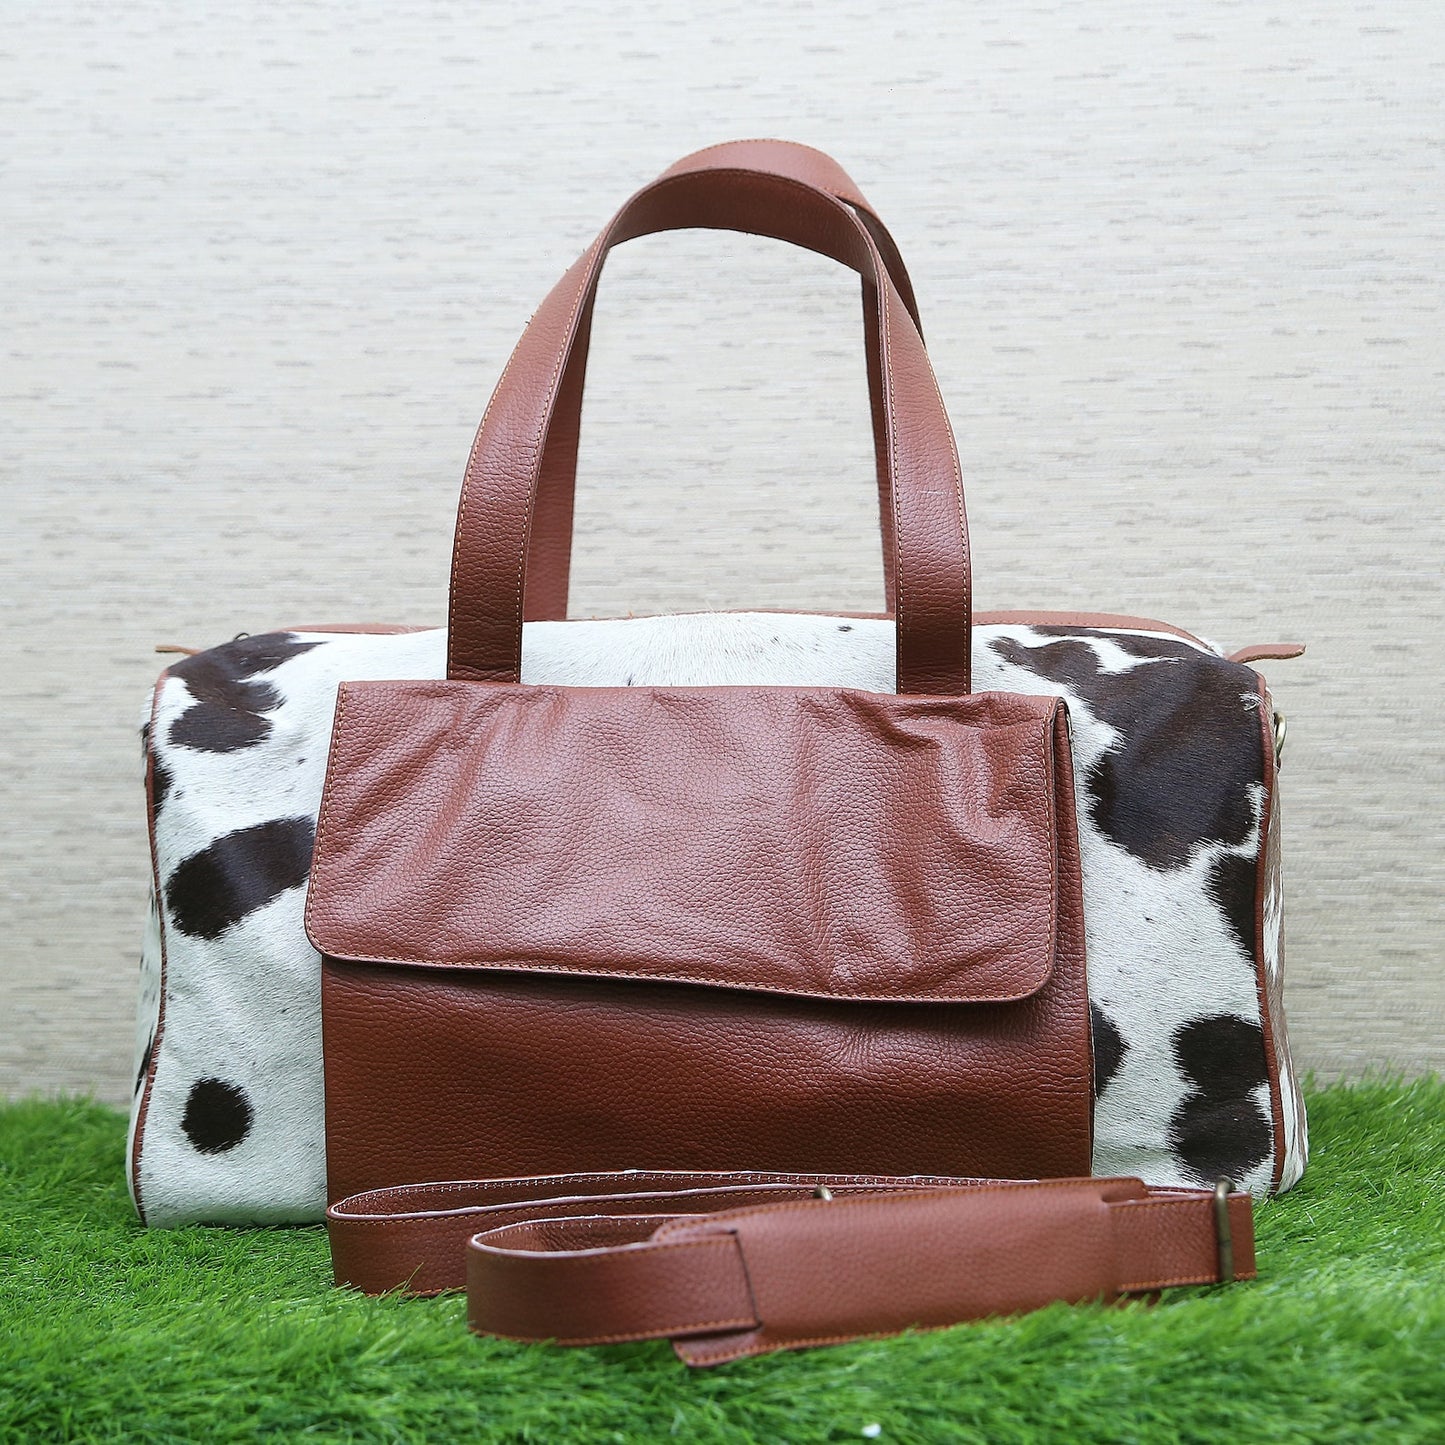 This is the perfect bag for any traveller, athlete or outdoor enthusiast. The natural cowhide duffel bag has been designed for ultimate durability and versatility. 